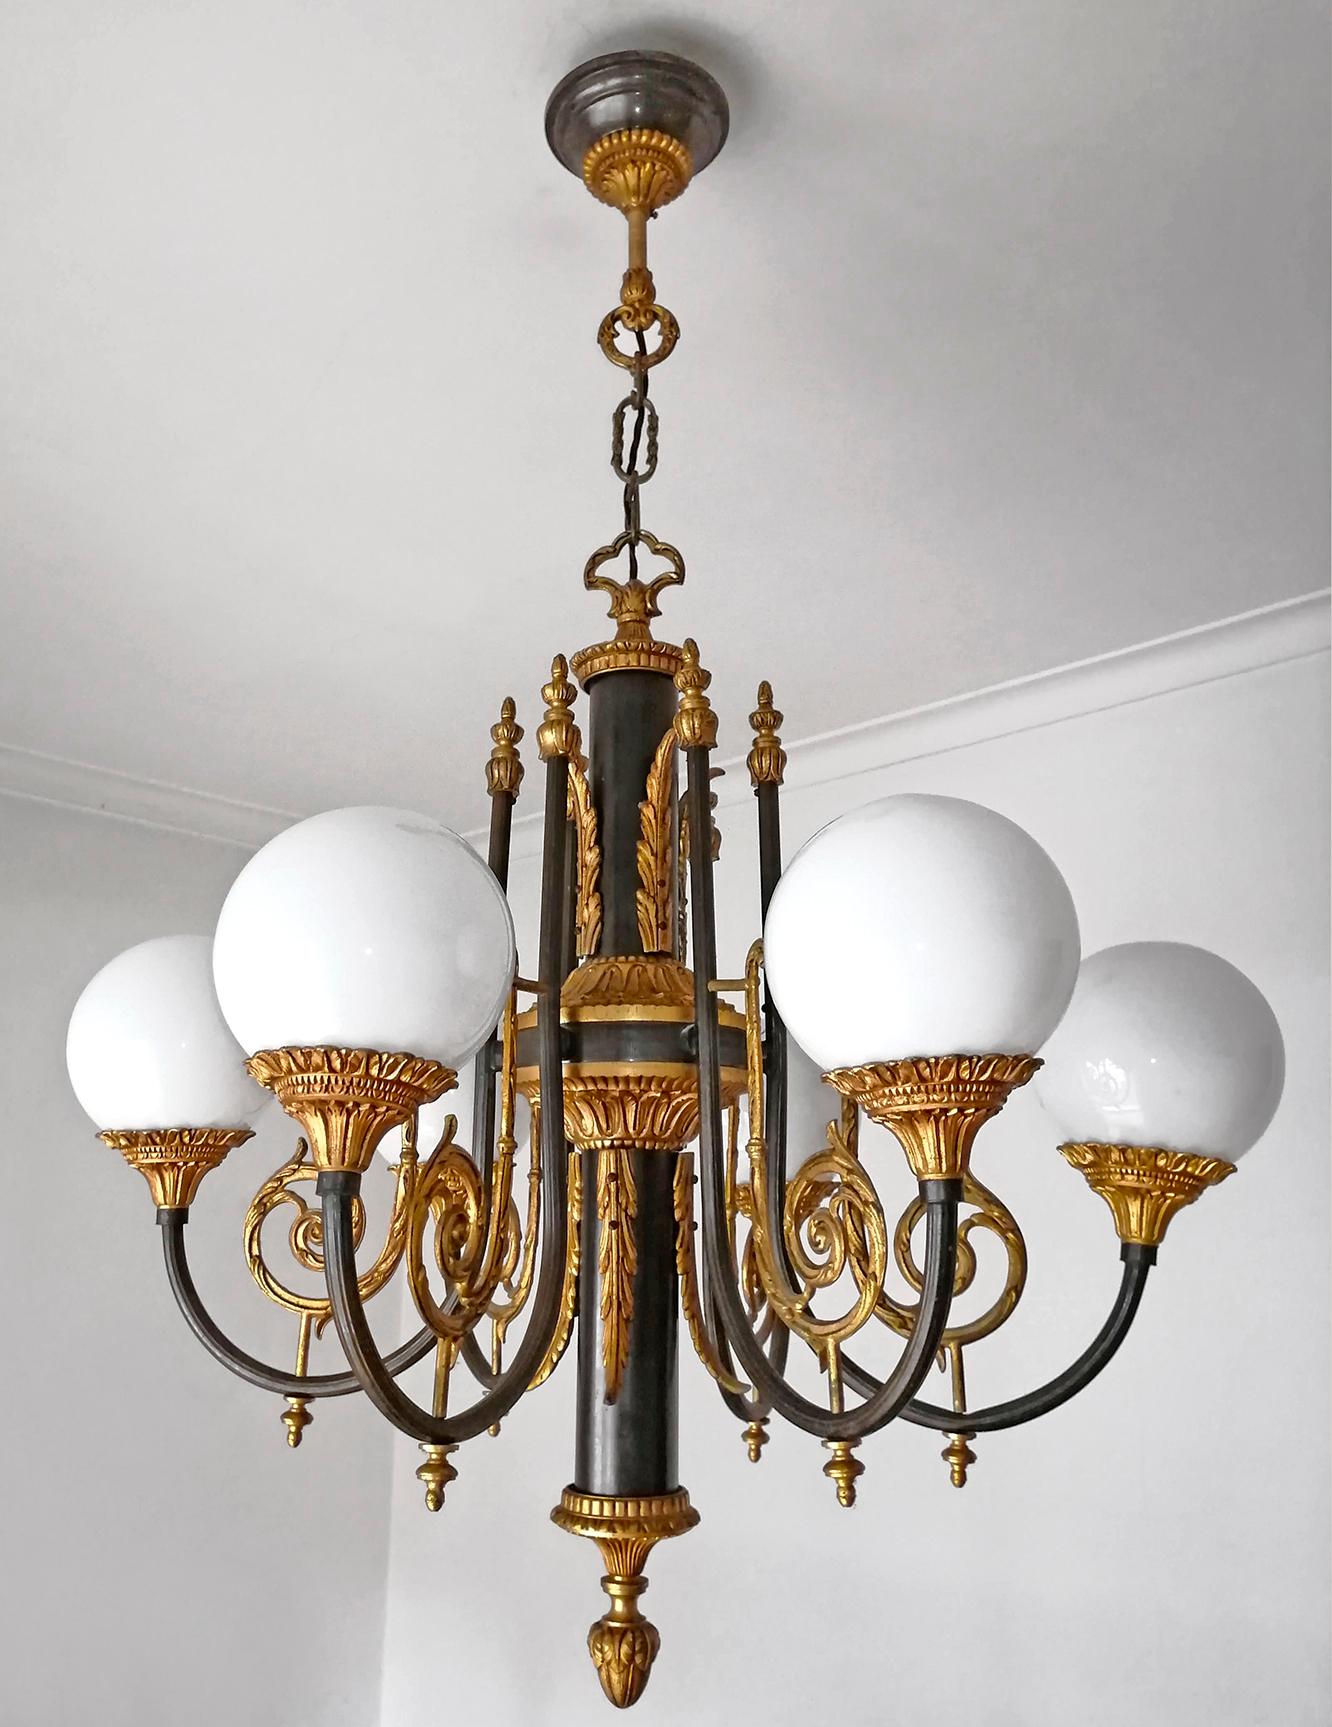 Spectacular neoclassical French Empire gilt bronze 6-light chandelier, patina and gold-plated solid bronze

Dimensions
Height 39.38 in. (100 cm)
Diameter 27.56 in. (70 cm)
Glass shades, 6 in (15 cm)
6-light bulbs E 14/good working